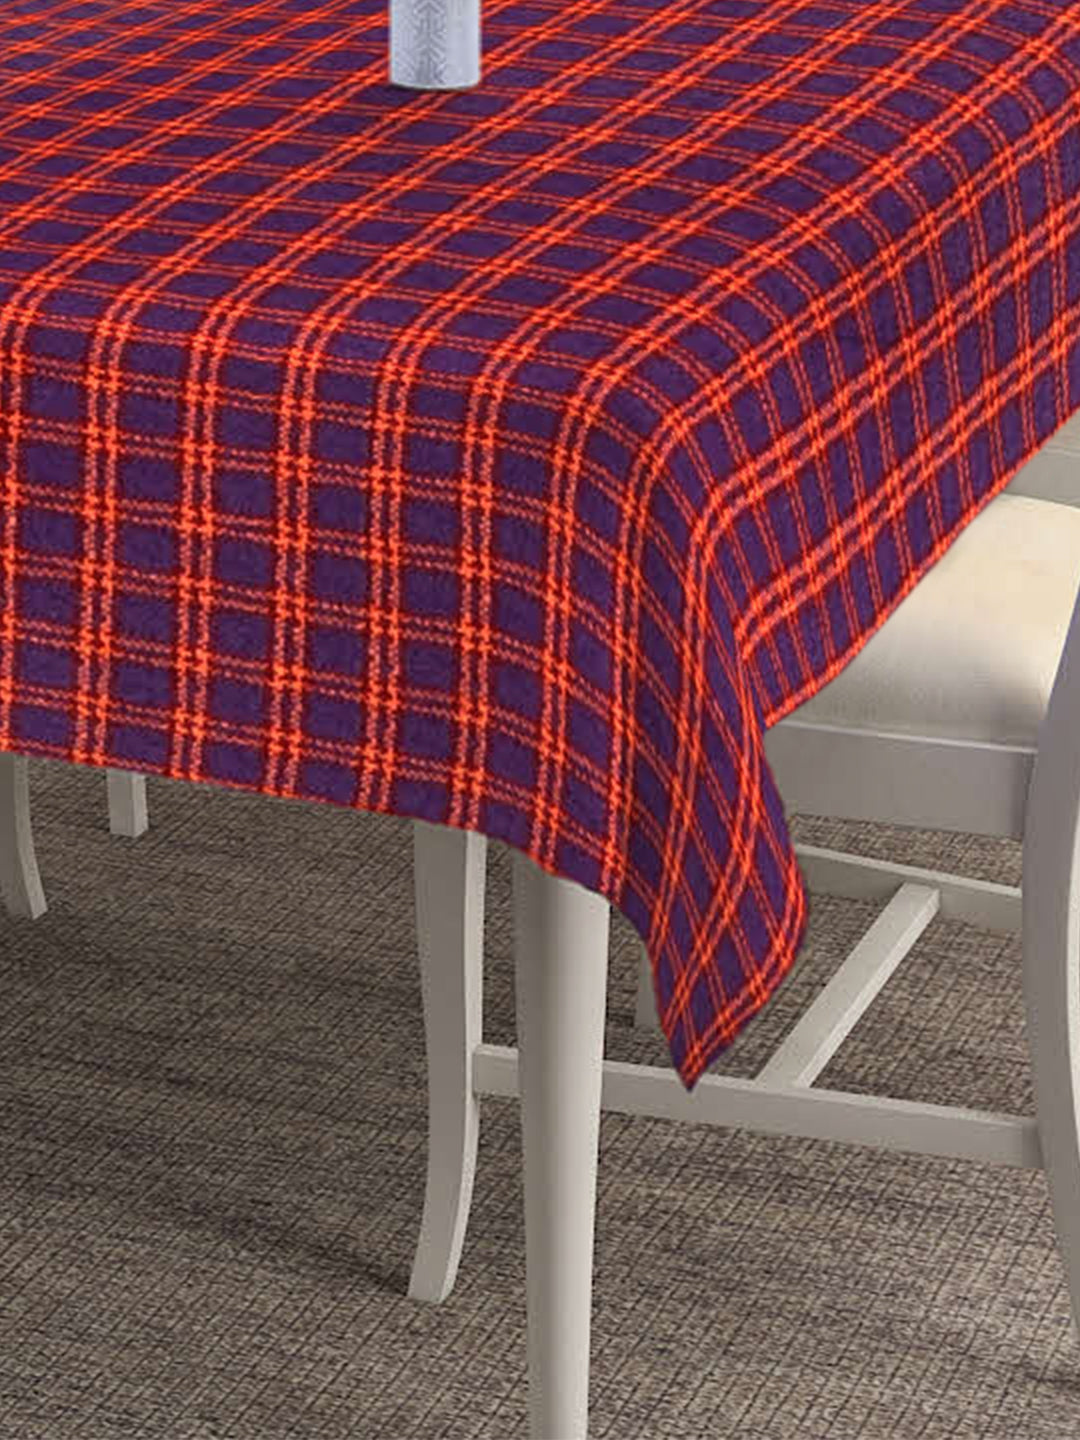 KLOTTHE Purple Cotton Striped Rectangle Table Cover (72X52 Inch)